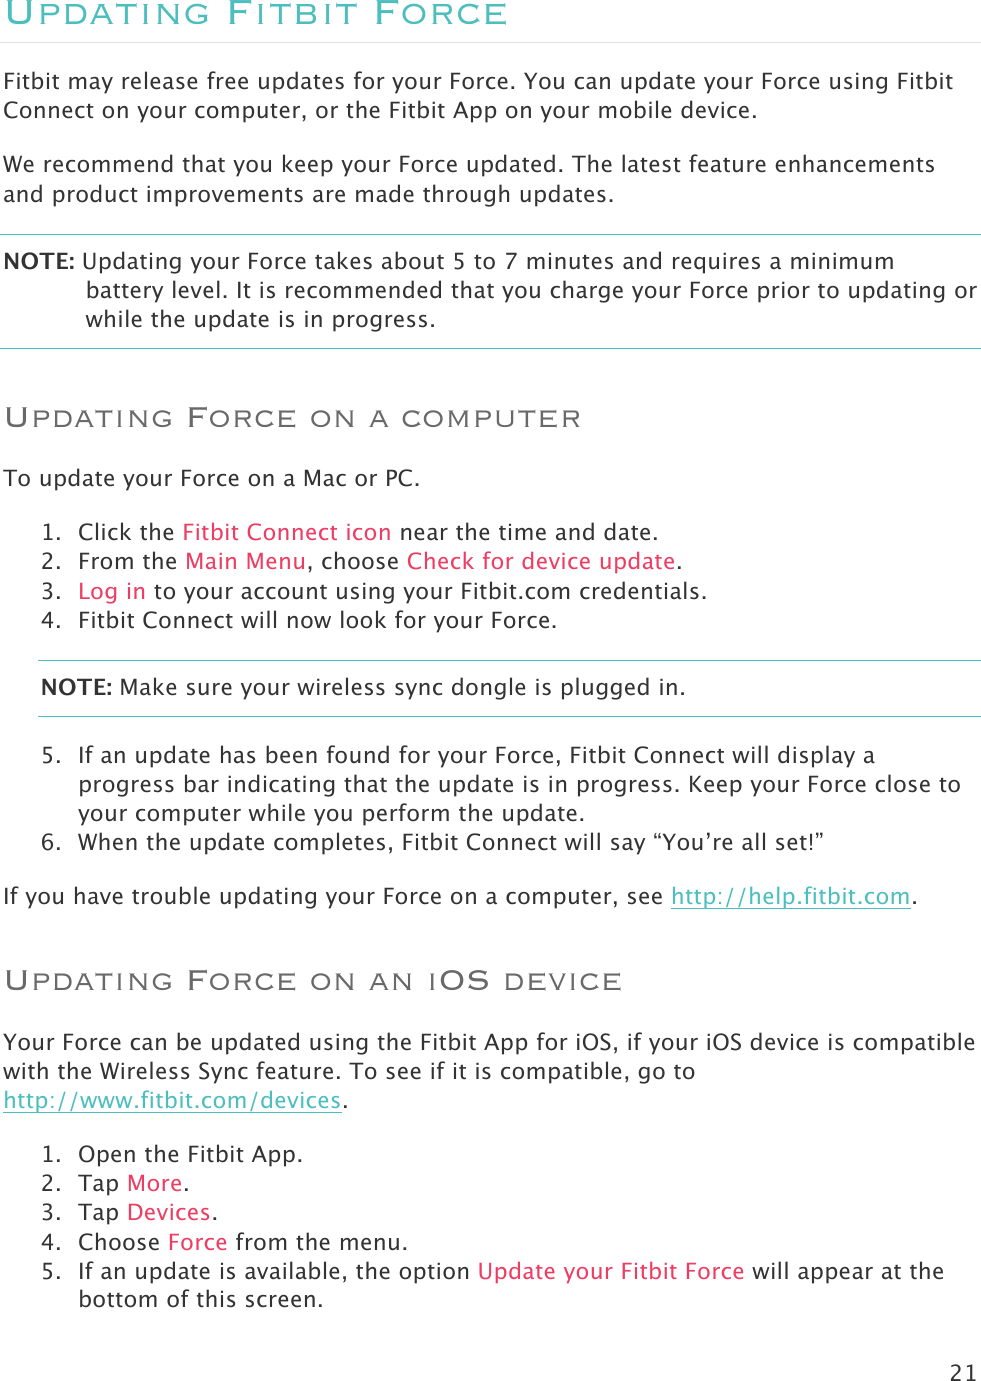 21  Updating Fitbit Force Fitbit may release free updates for your Force. You can update your Force using Fitbit Connect on your computer, or the Fitbit App on your mobile device.  We recommend that you keep your Force updated. The latest feature enhancements and product improvements are made through updates.  NOTE: Updating your Force takes about 5 to 7 minutes and requires a minimum battery level. It is recommended that you charge your Force prior to updating or while the update is in progress.   Updating Force on a computer To update your Force on a Mac or PC.  1. Click the Fitbit Connect icon near the time and date.  2. From the Main Menu, choose Check for device update. 3. Log in to your account using your Fitbit.com credentials.  4. Fitbit Connect will now look for your Force. NOTE: Make sure your wireless sync dongle is plugged in.  5. If an update has been found for your Force, Fitbit Connect will display a progress bar indicating that the update is in progress. Keep your Force close to your computer while you perform the update.   6. When the update completes, Fitbit Connect will say “You’re all set!”  If you have trouble updating your Force on a computer, see http://help.fitbit.com. Updating Force on an iOS device Your Force can be updated using the Fitbit App for iOS, if your iOS device is compatible with the Wireless Sync feature. To see if it is compatible, go to http://www.fitbit.com/devices.  1. Open the Fitbit App.  2. Tap More. 3. Tap Devices. 4. Choose Force from the menu. 5. If an update is available, the option Update your Fitbit Force will appear at the bottom of this screen. 